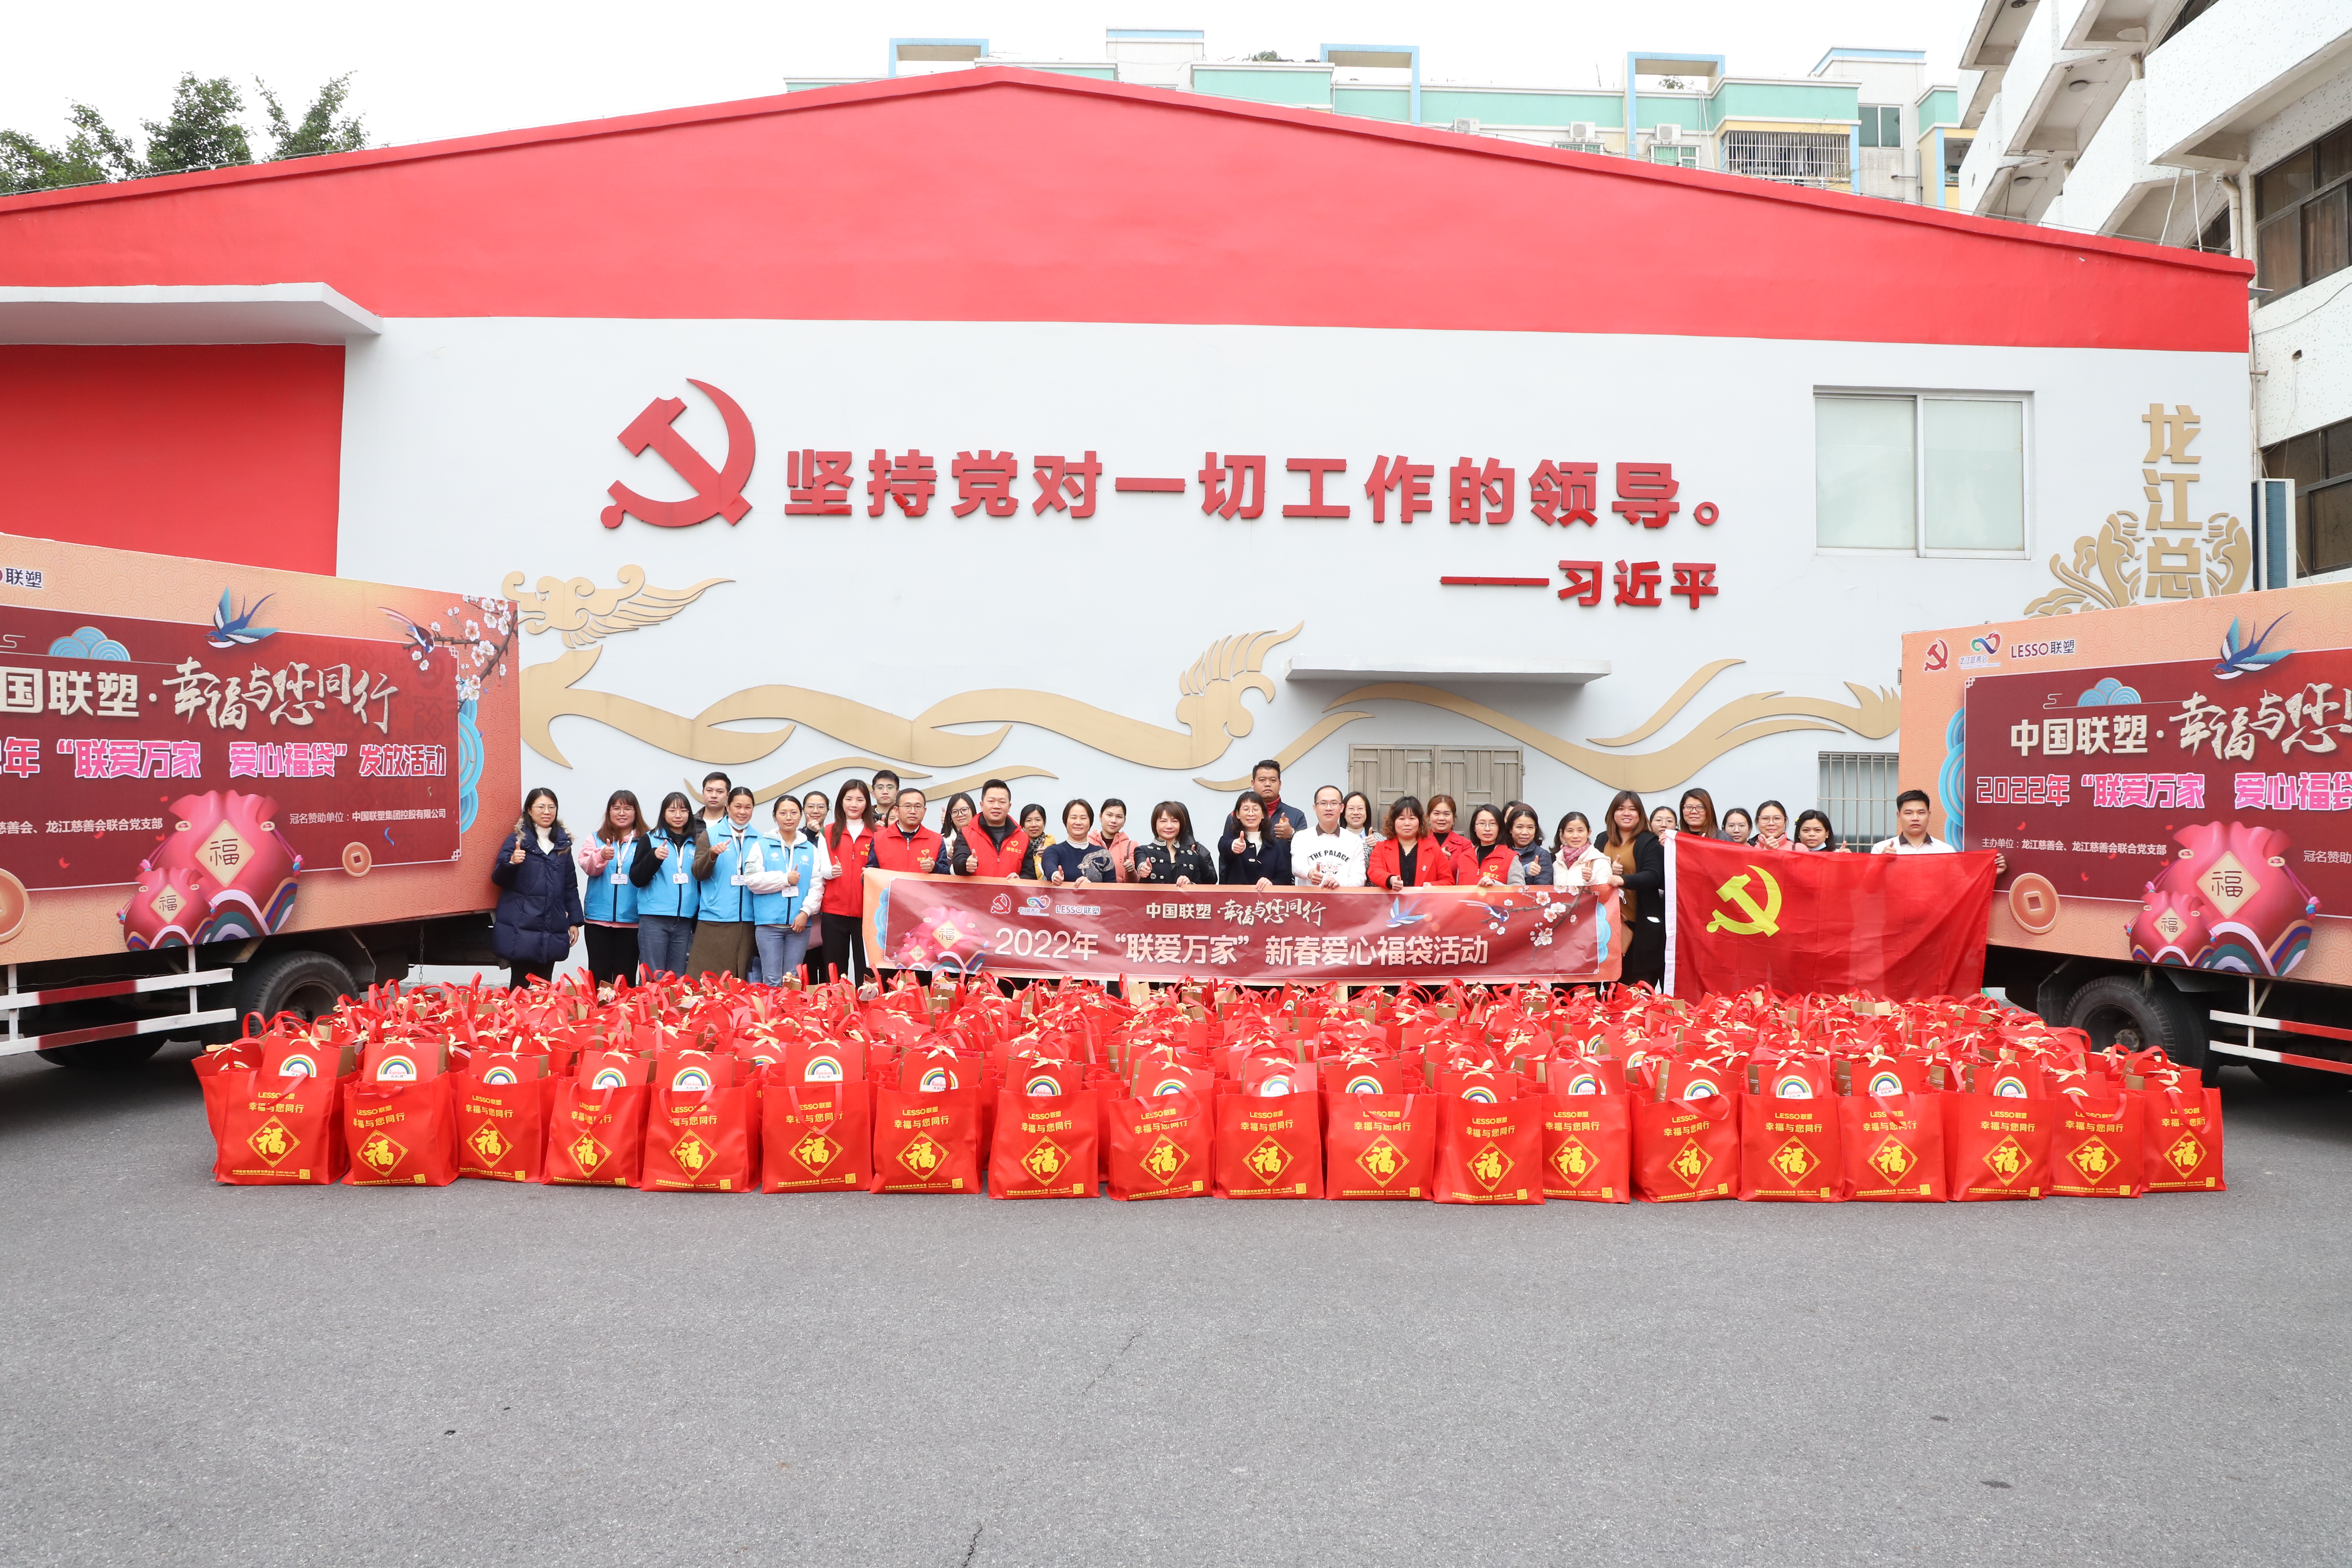 Donation by Guangdong Lesso for Spring Festival